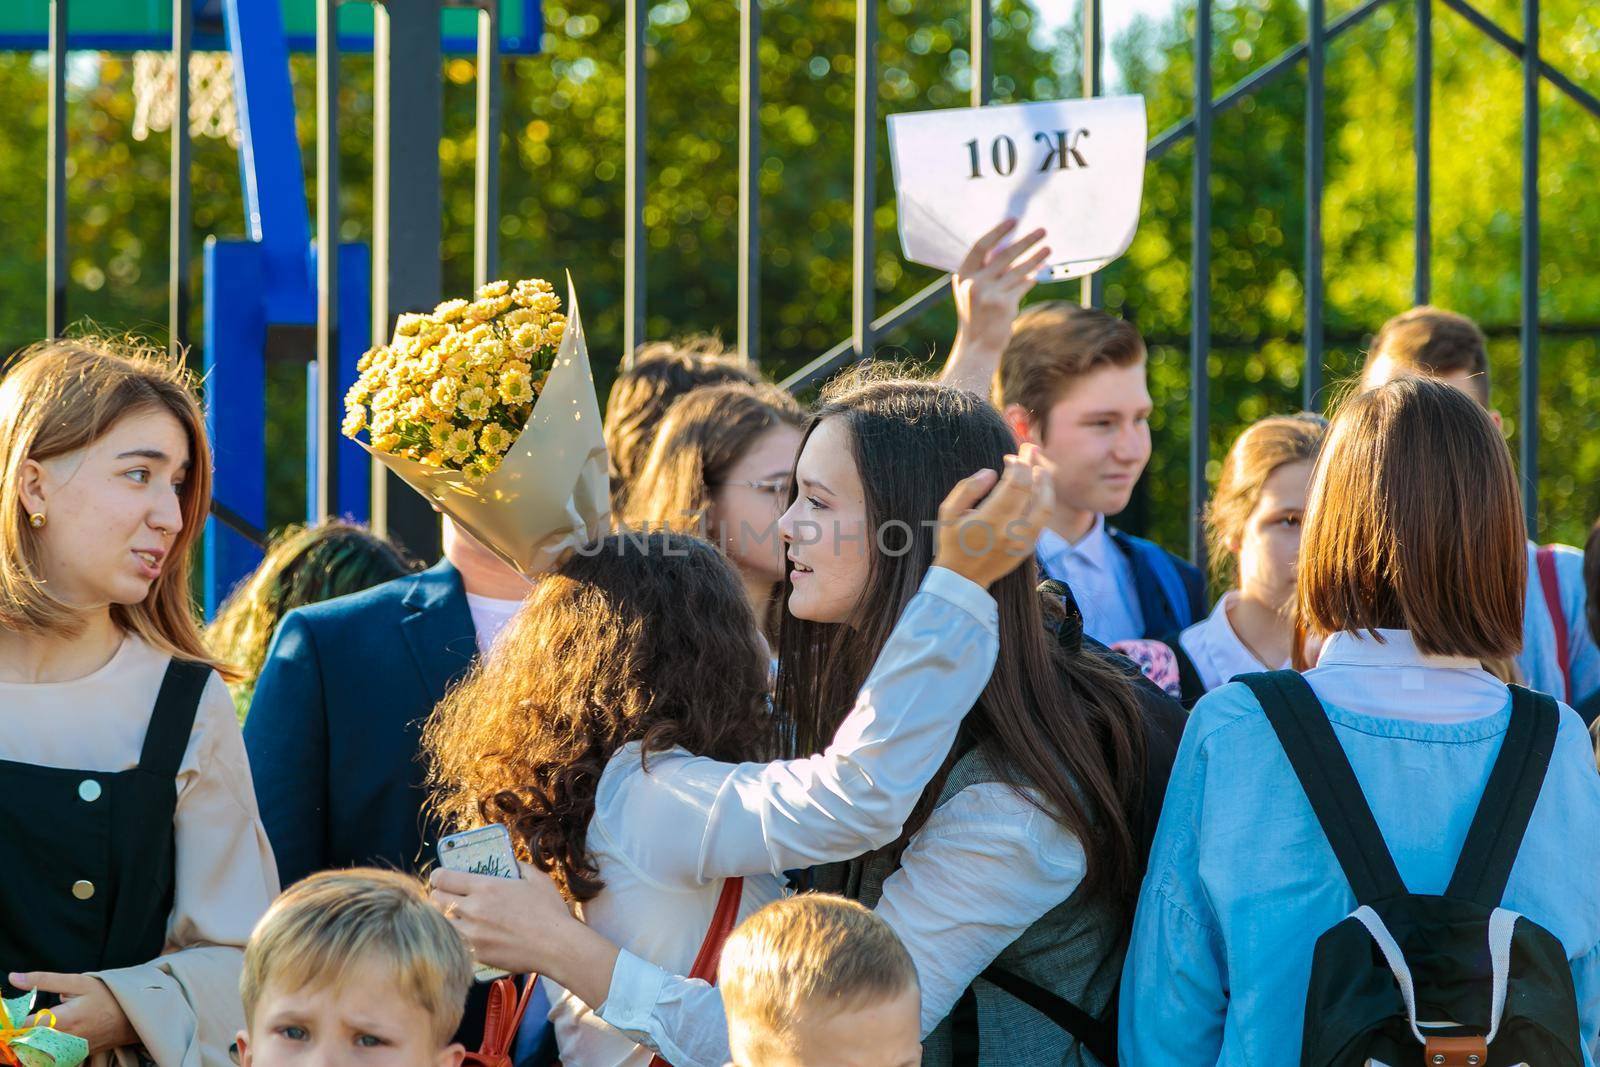 High school students met at the lineup on September 1 at school. Moscow, Russia, September 2, 2019